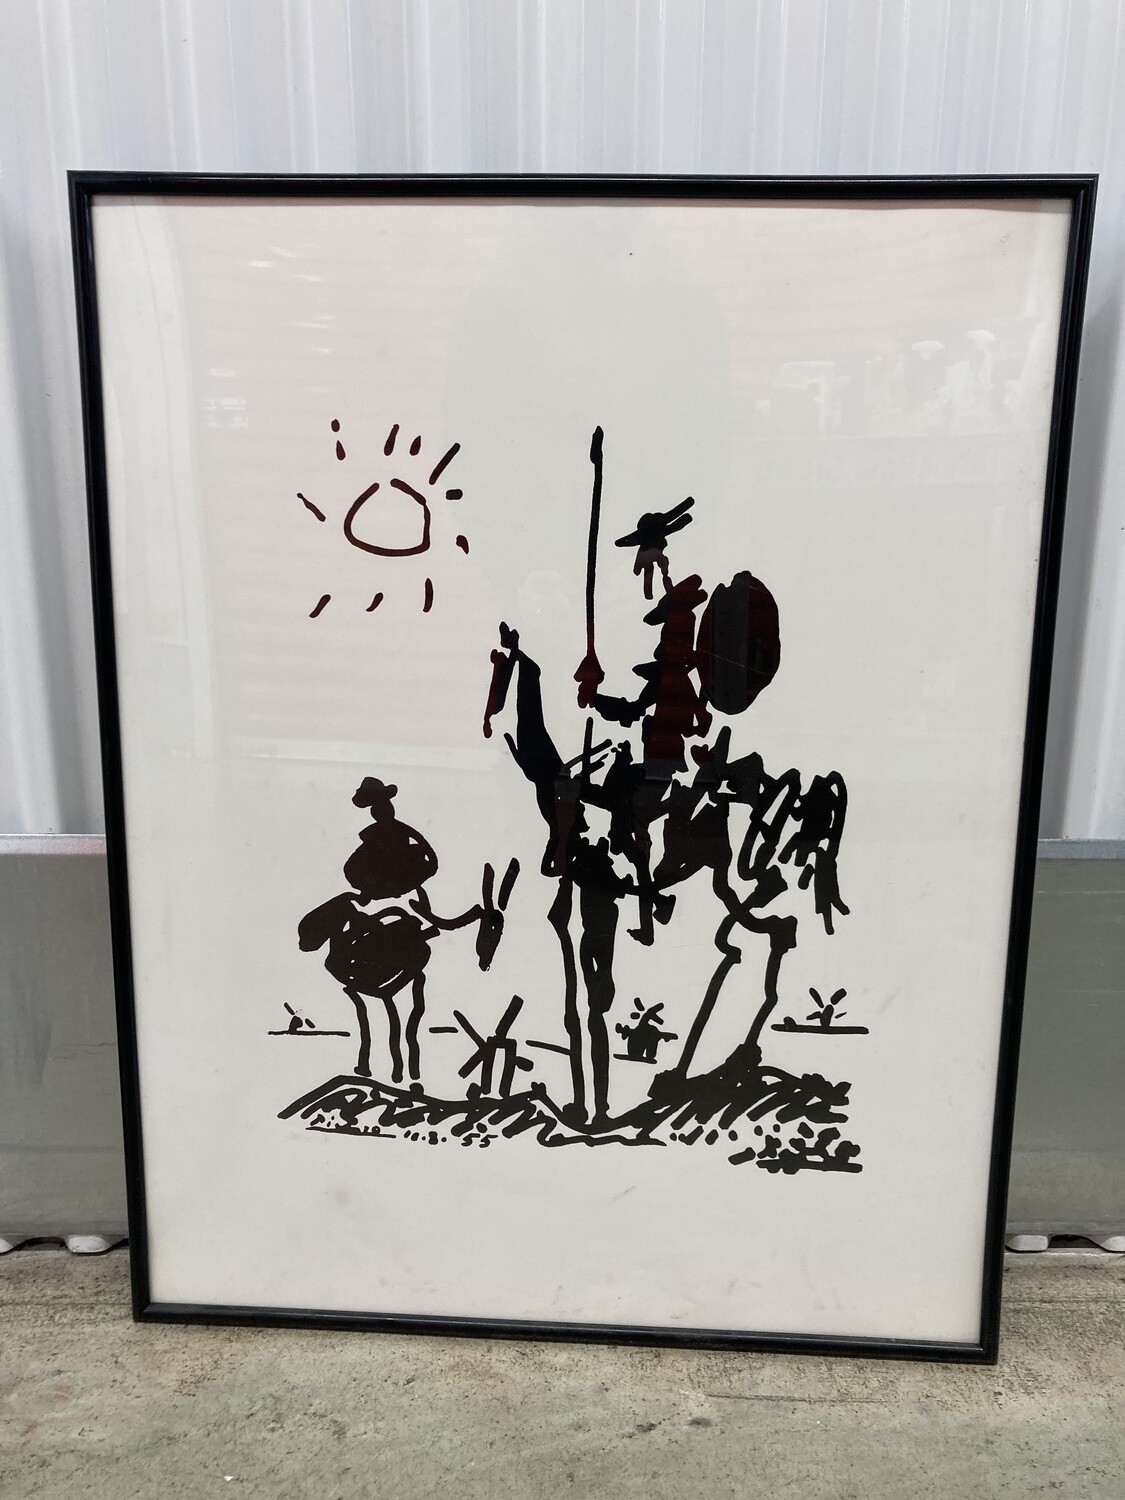 Framed Print: Picasso "Don Quixote" #2314 - 4 mos to sell at 50% off